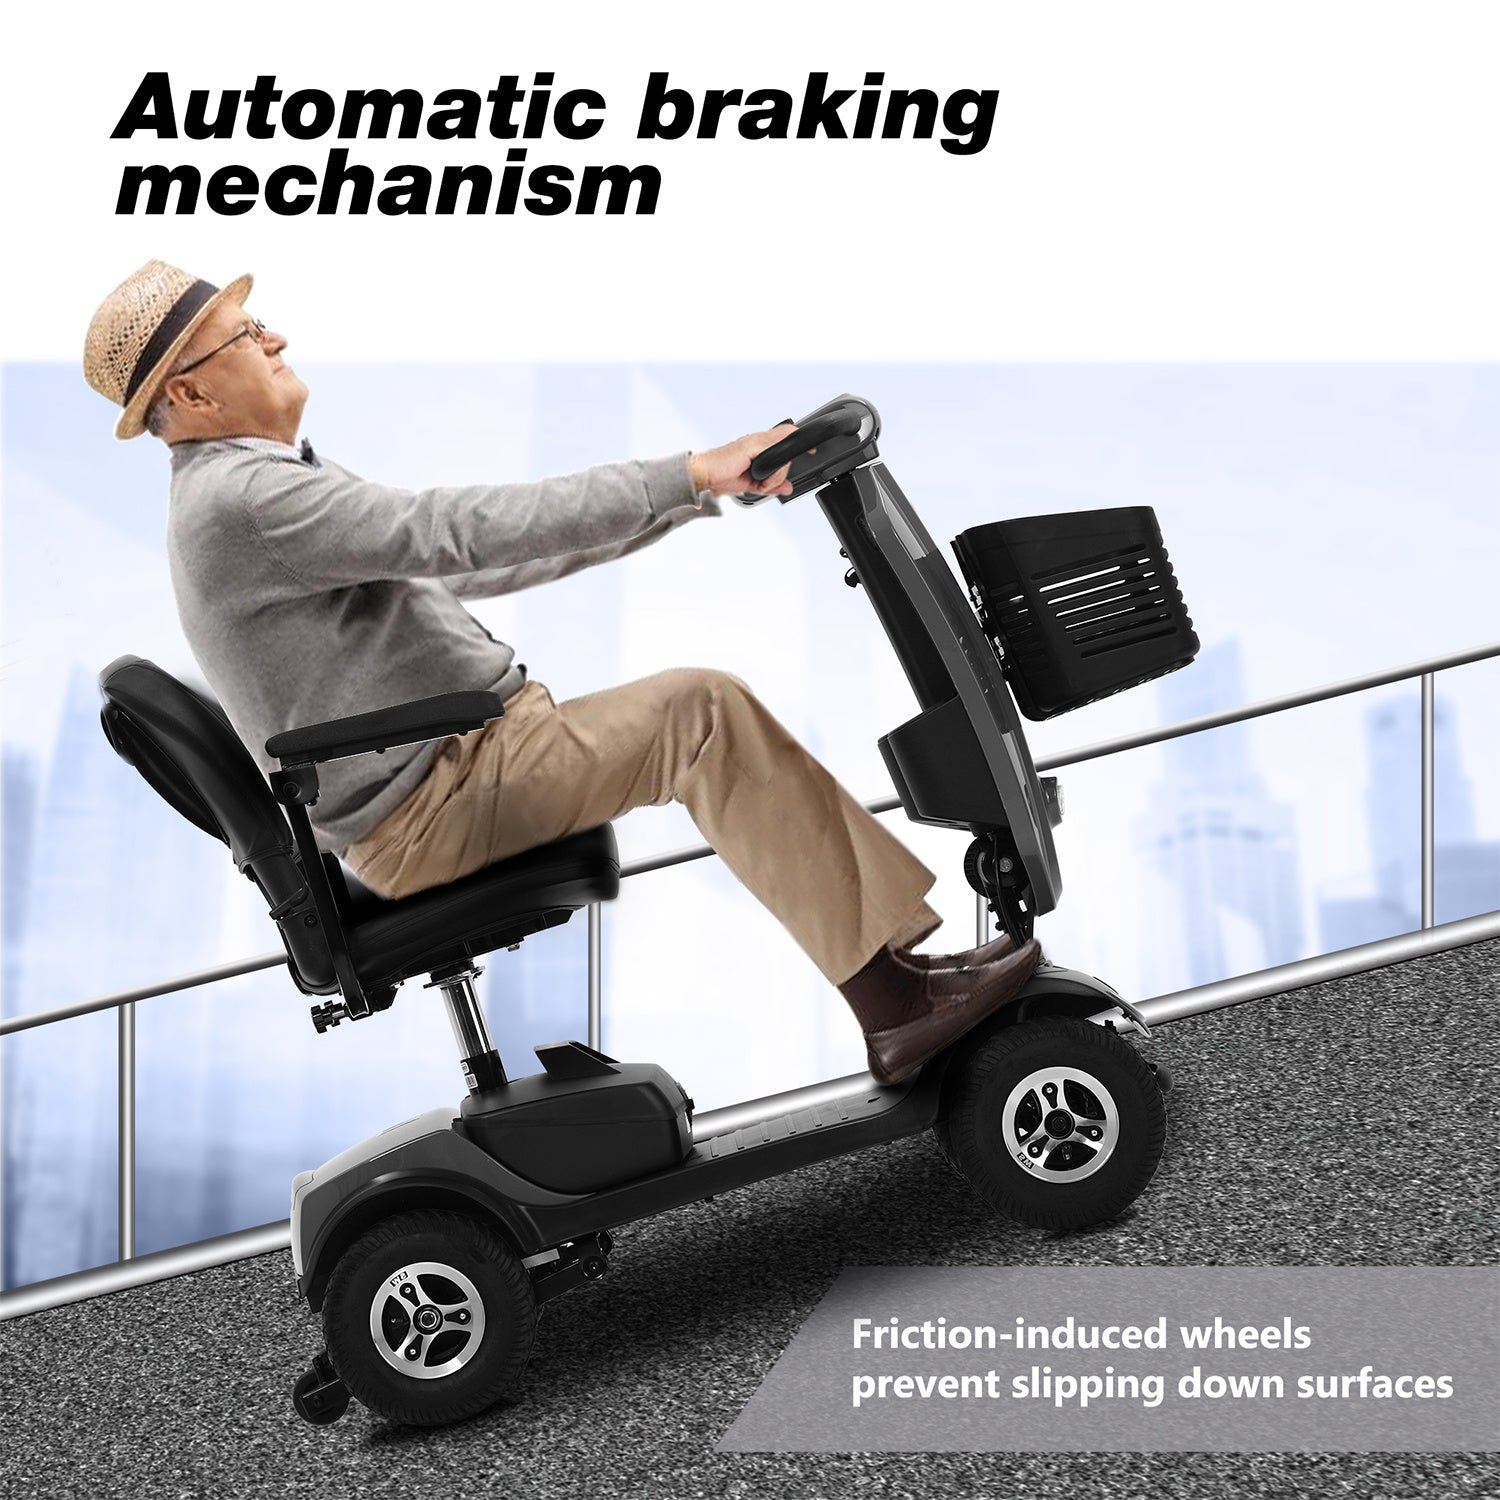 Mobility Lightweight Compact Scooters With Front Windshield